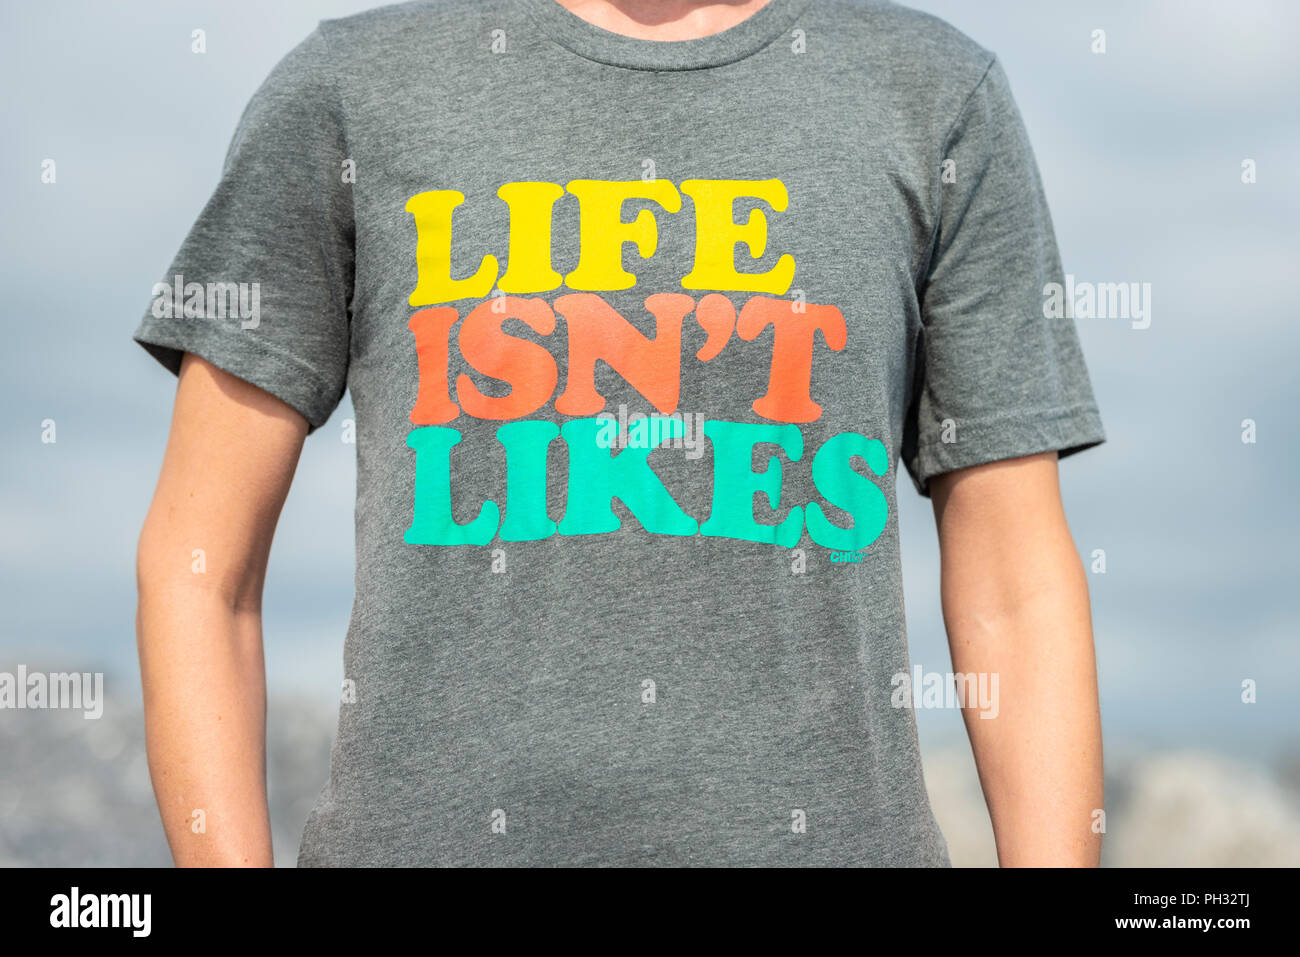 T shirt with slogan 'Life isn't likes' on the front. Stock Photo